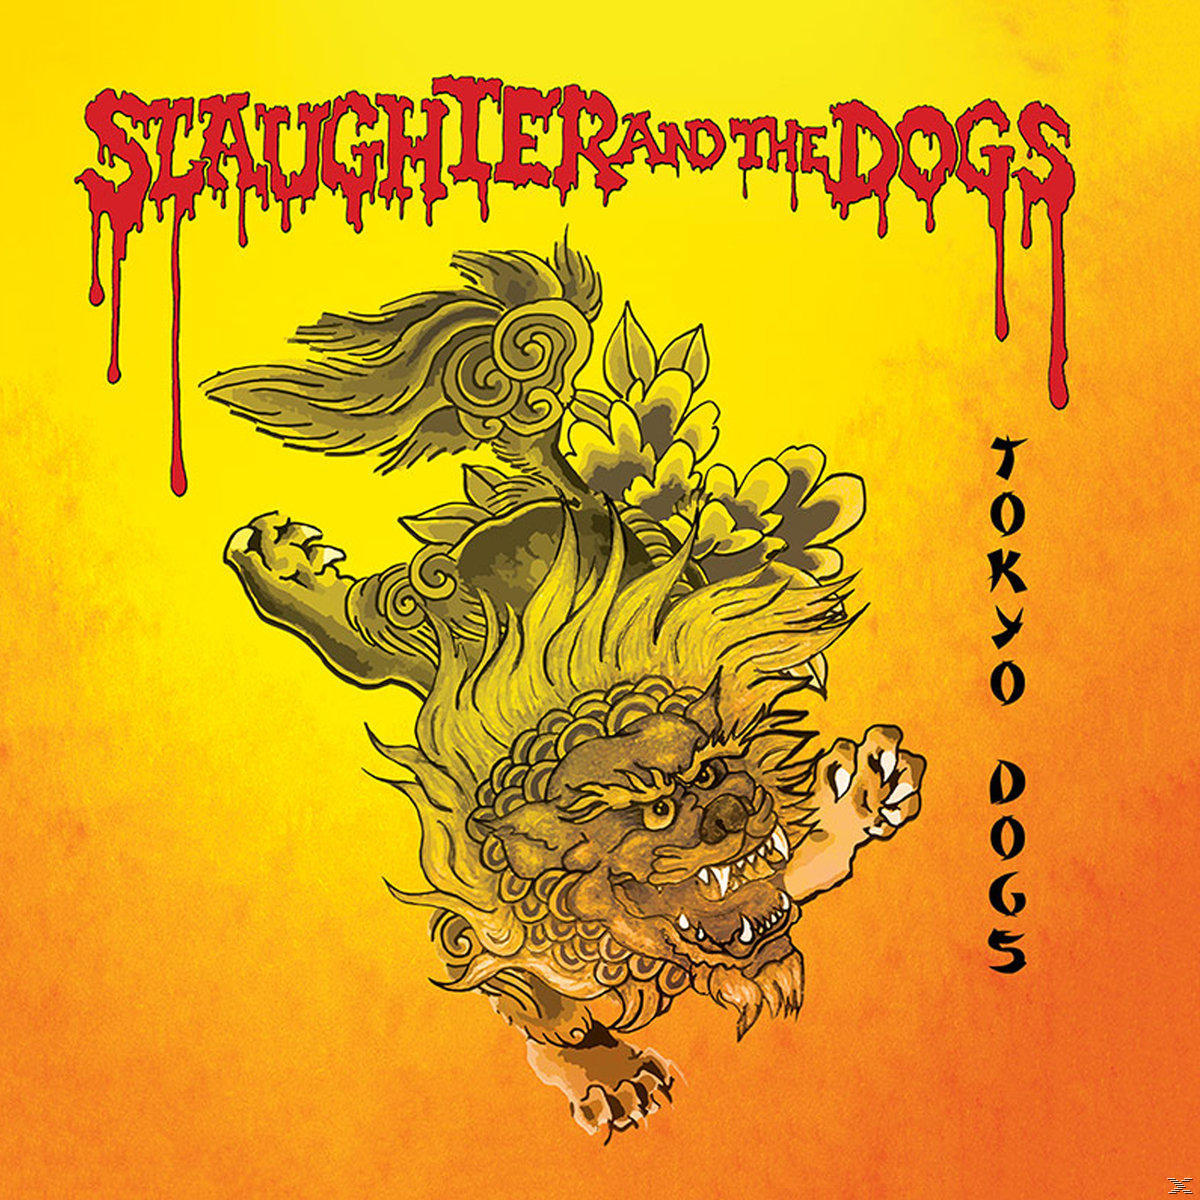 & Tokyo - Dogs - The (Vinyl) Slaughter Dogs